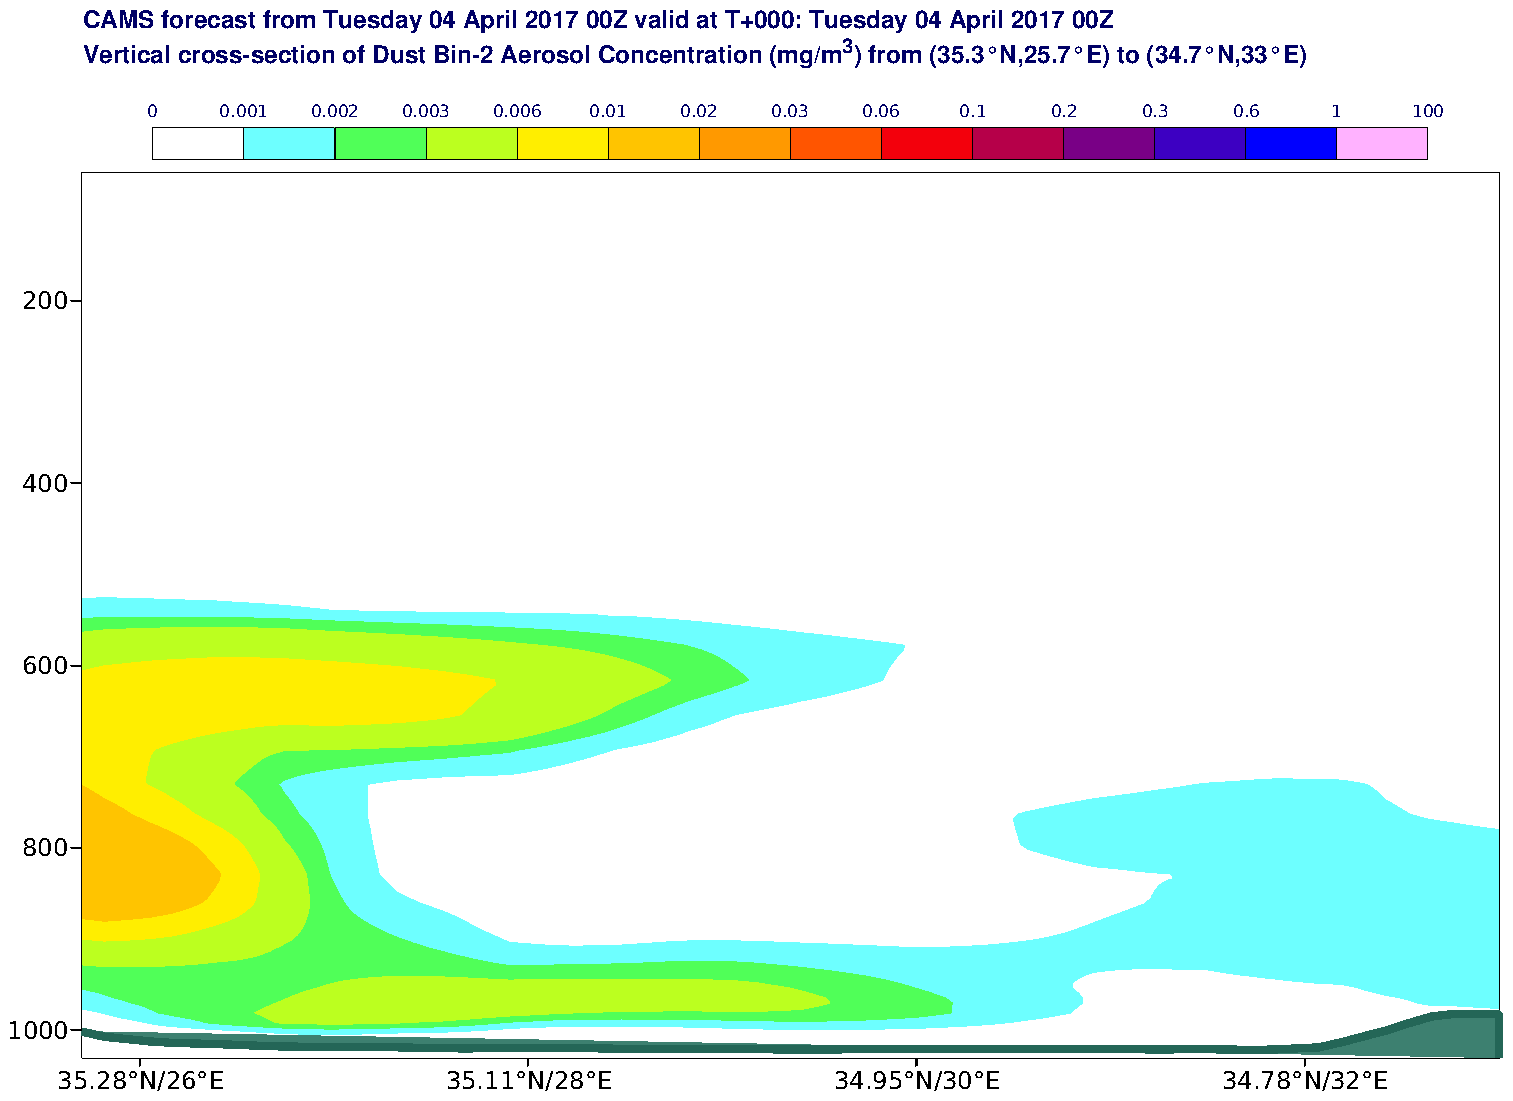 Vertical cross-section of Dust Bin-2 Aerosol Concentration (mg/m3) valid at T0 - 2017-04-04 00:00